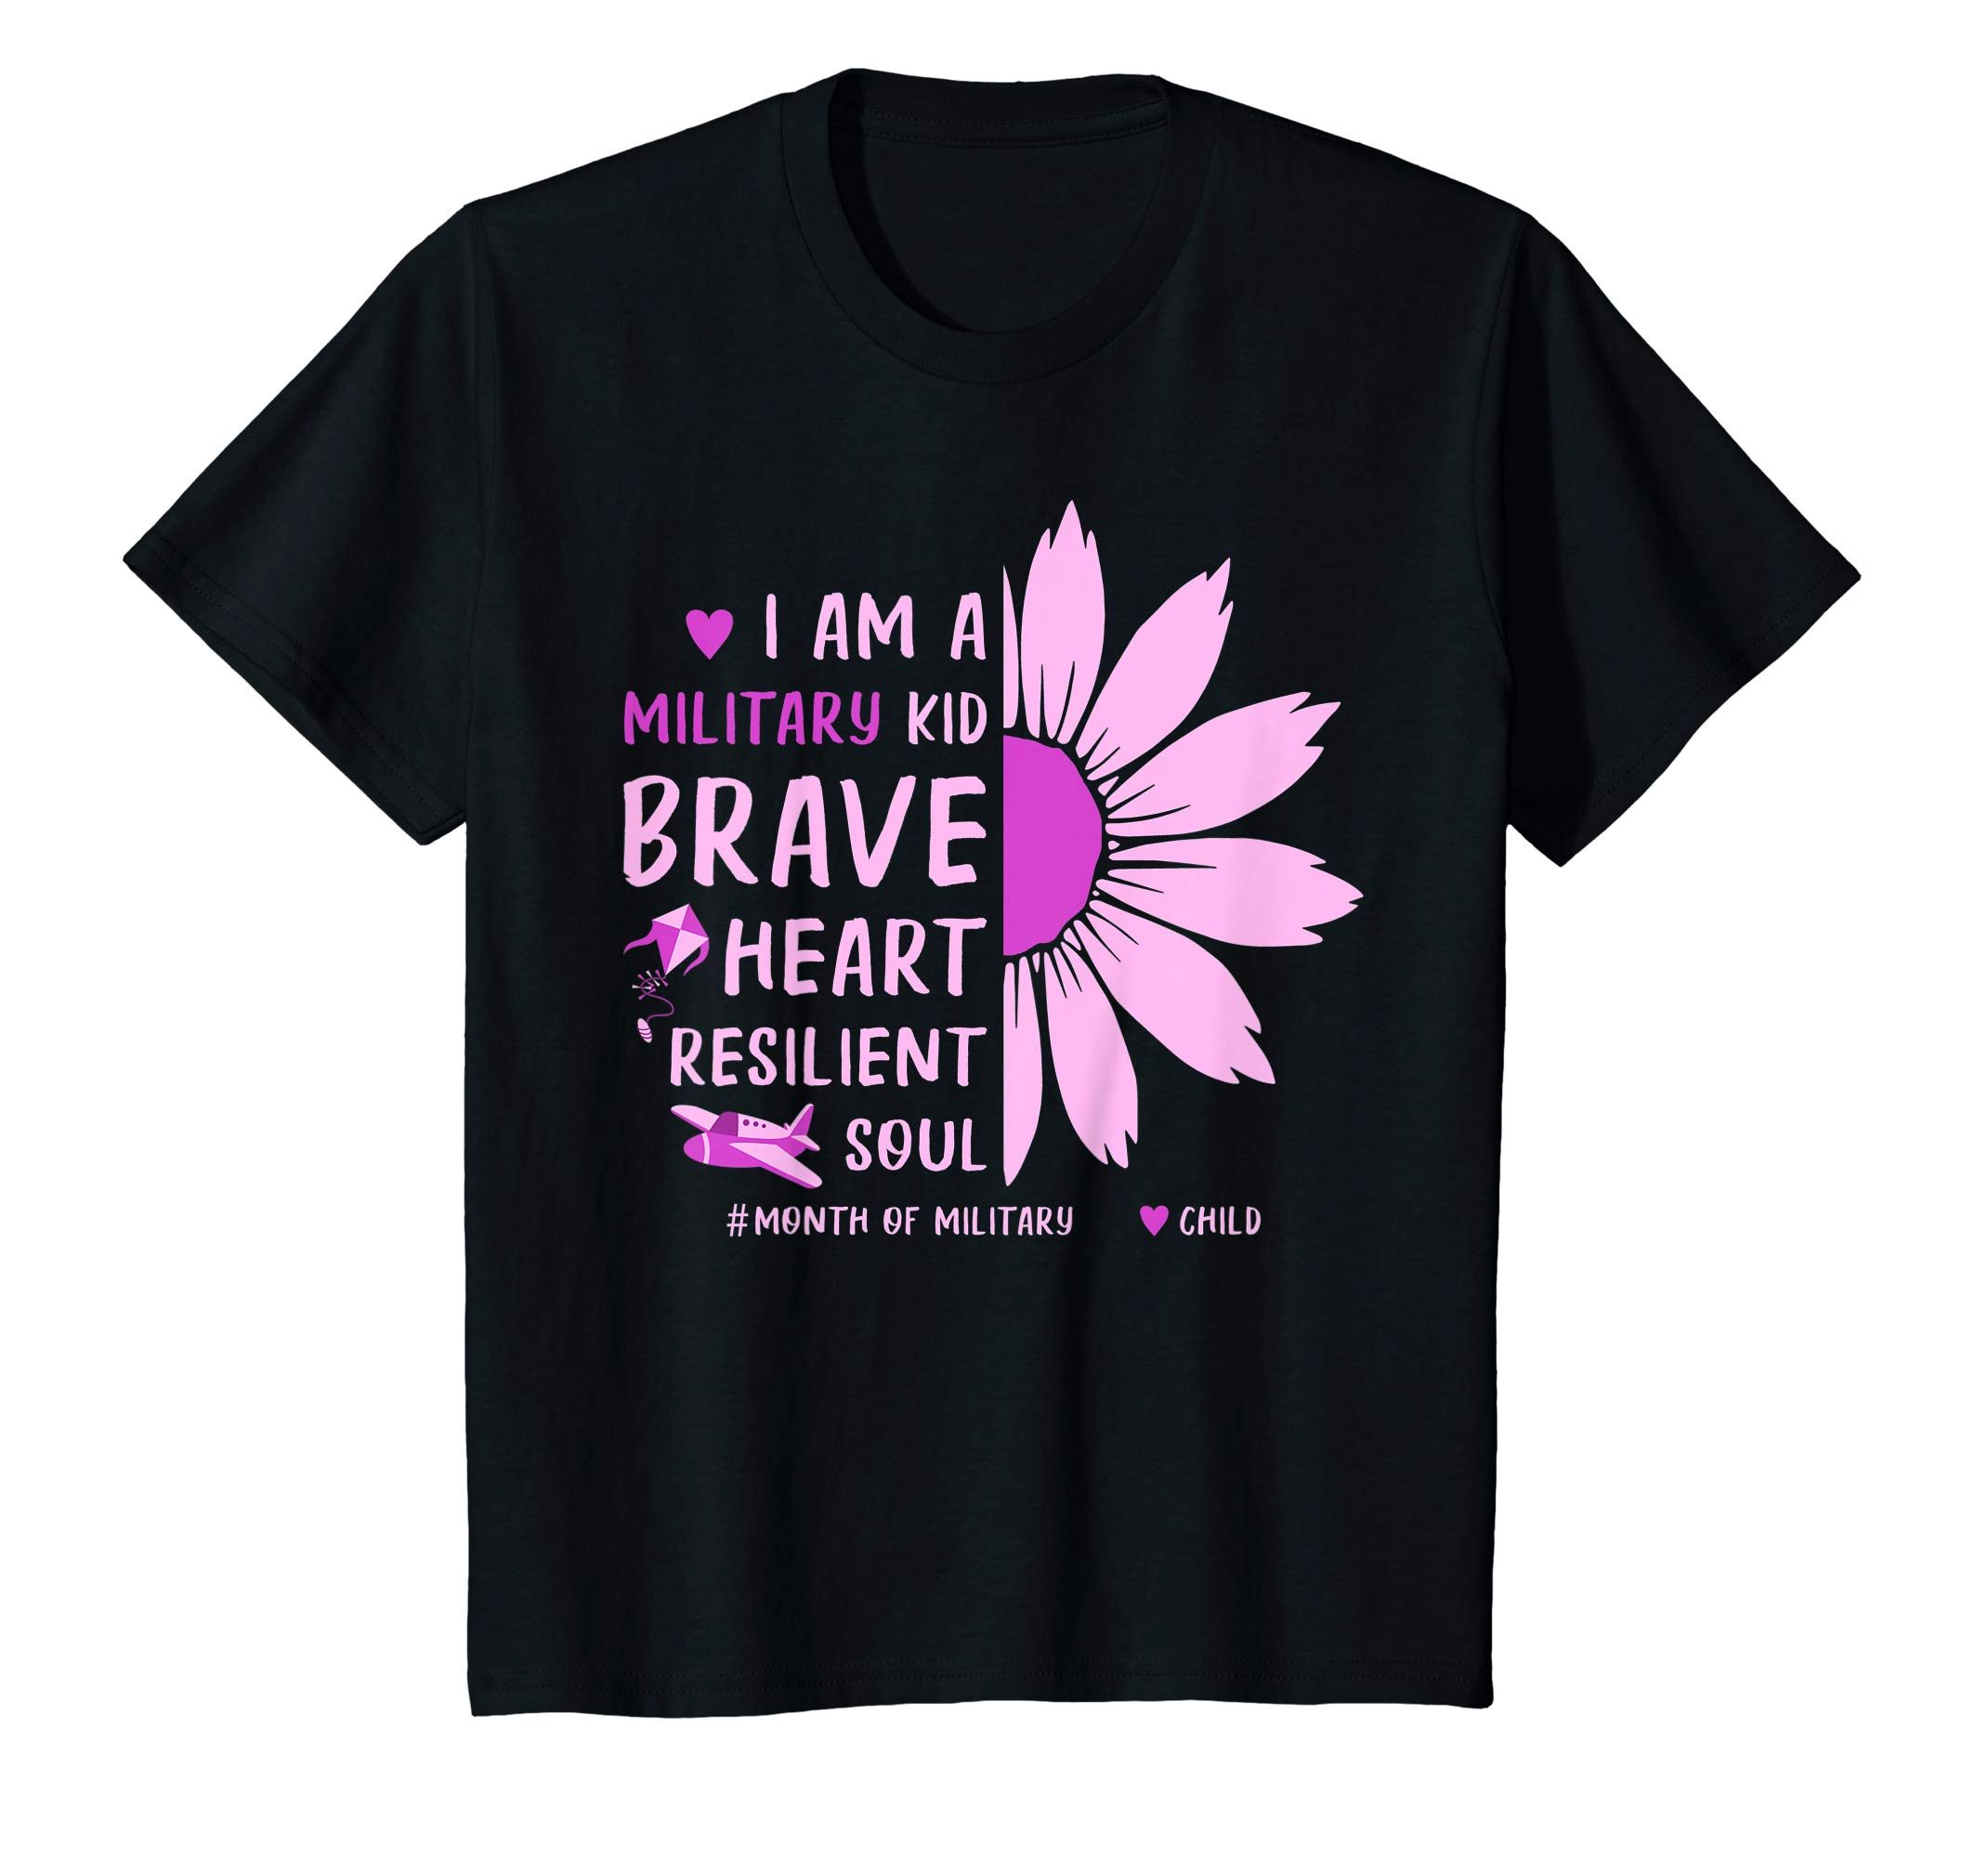 I Am A Military Kid Brave Heart And Resilient Soul Shirt - Reviewshirts ...